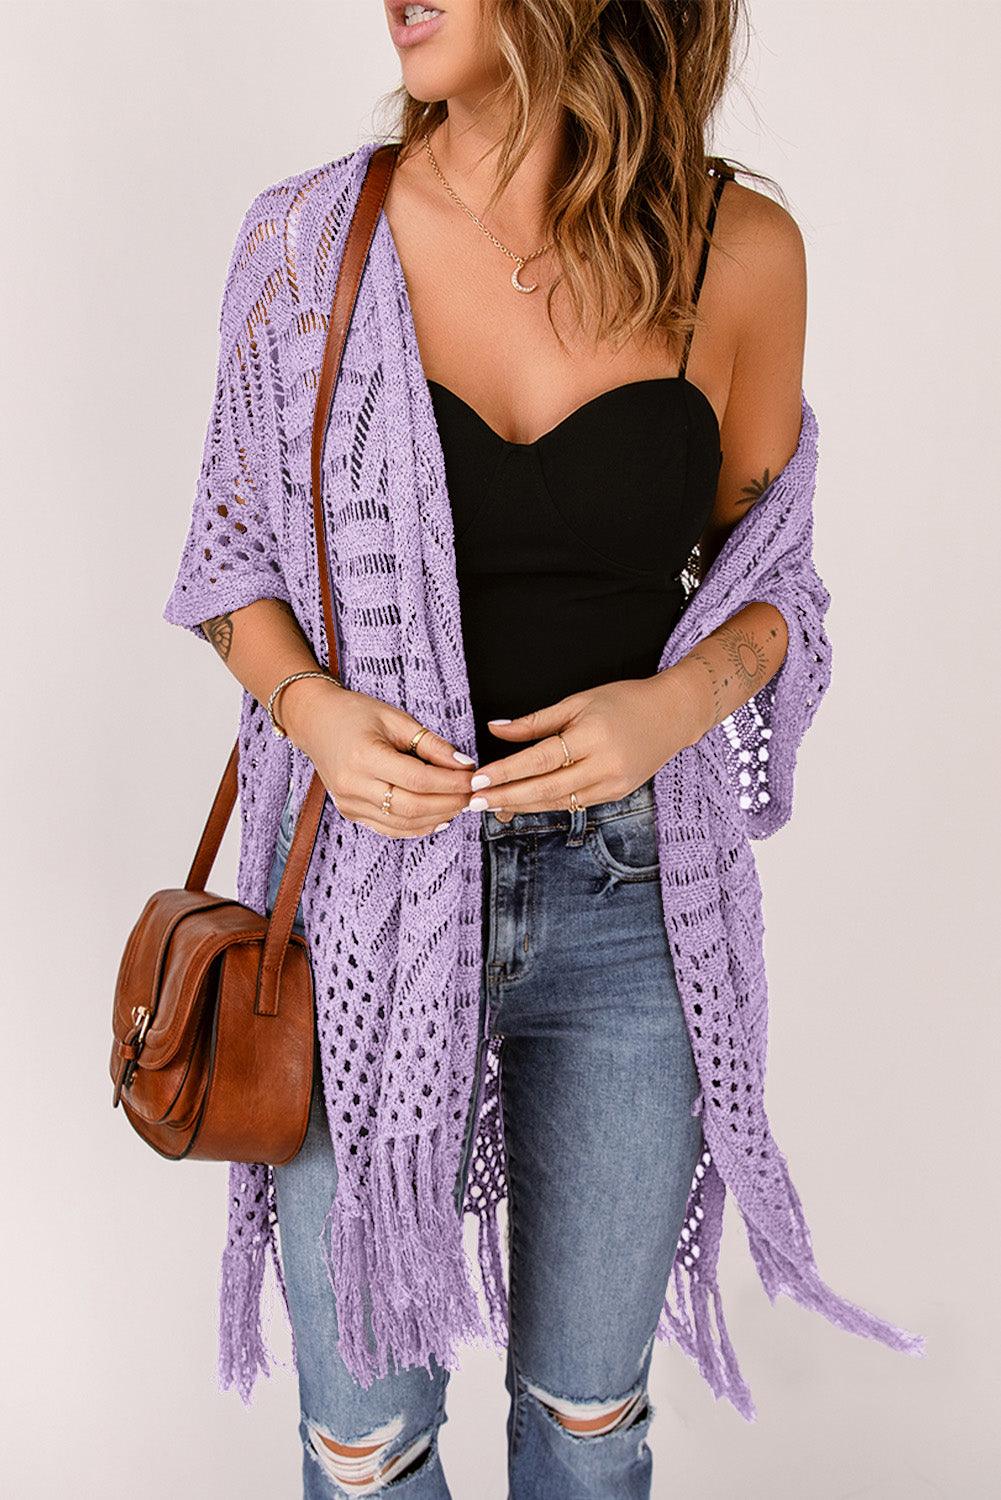 a woman in a black top and a purple shawl